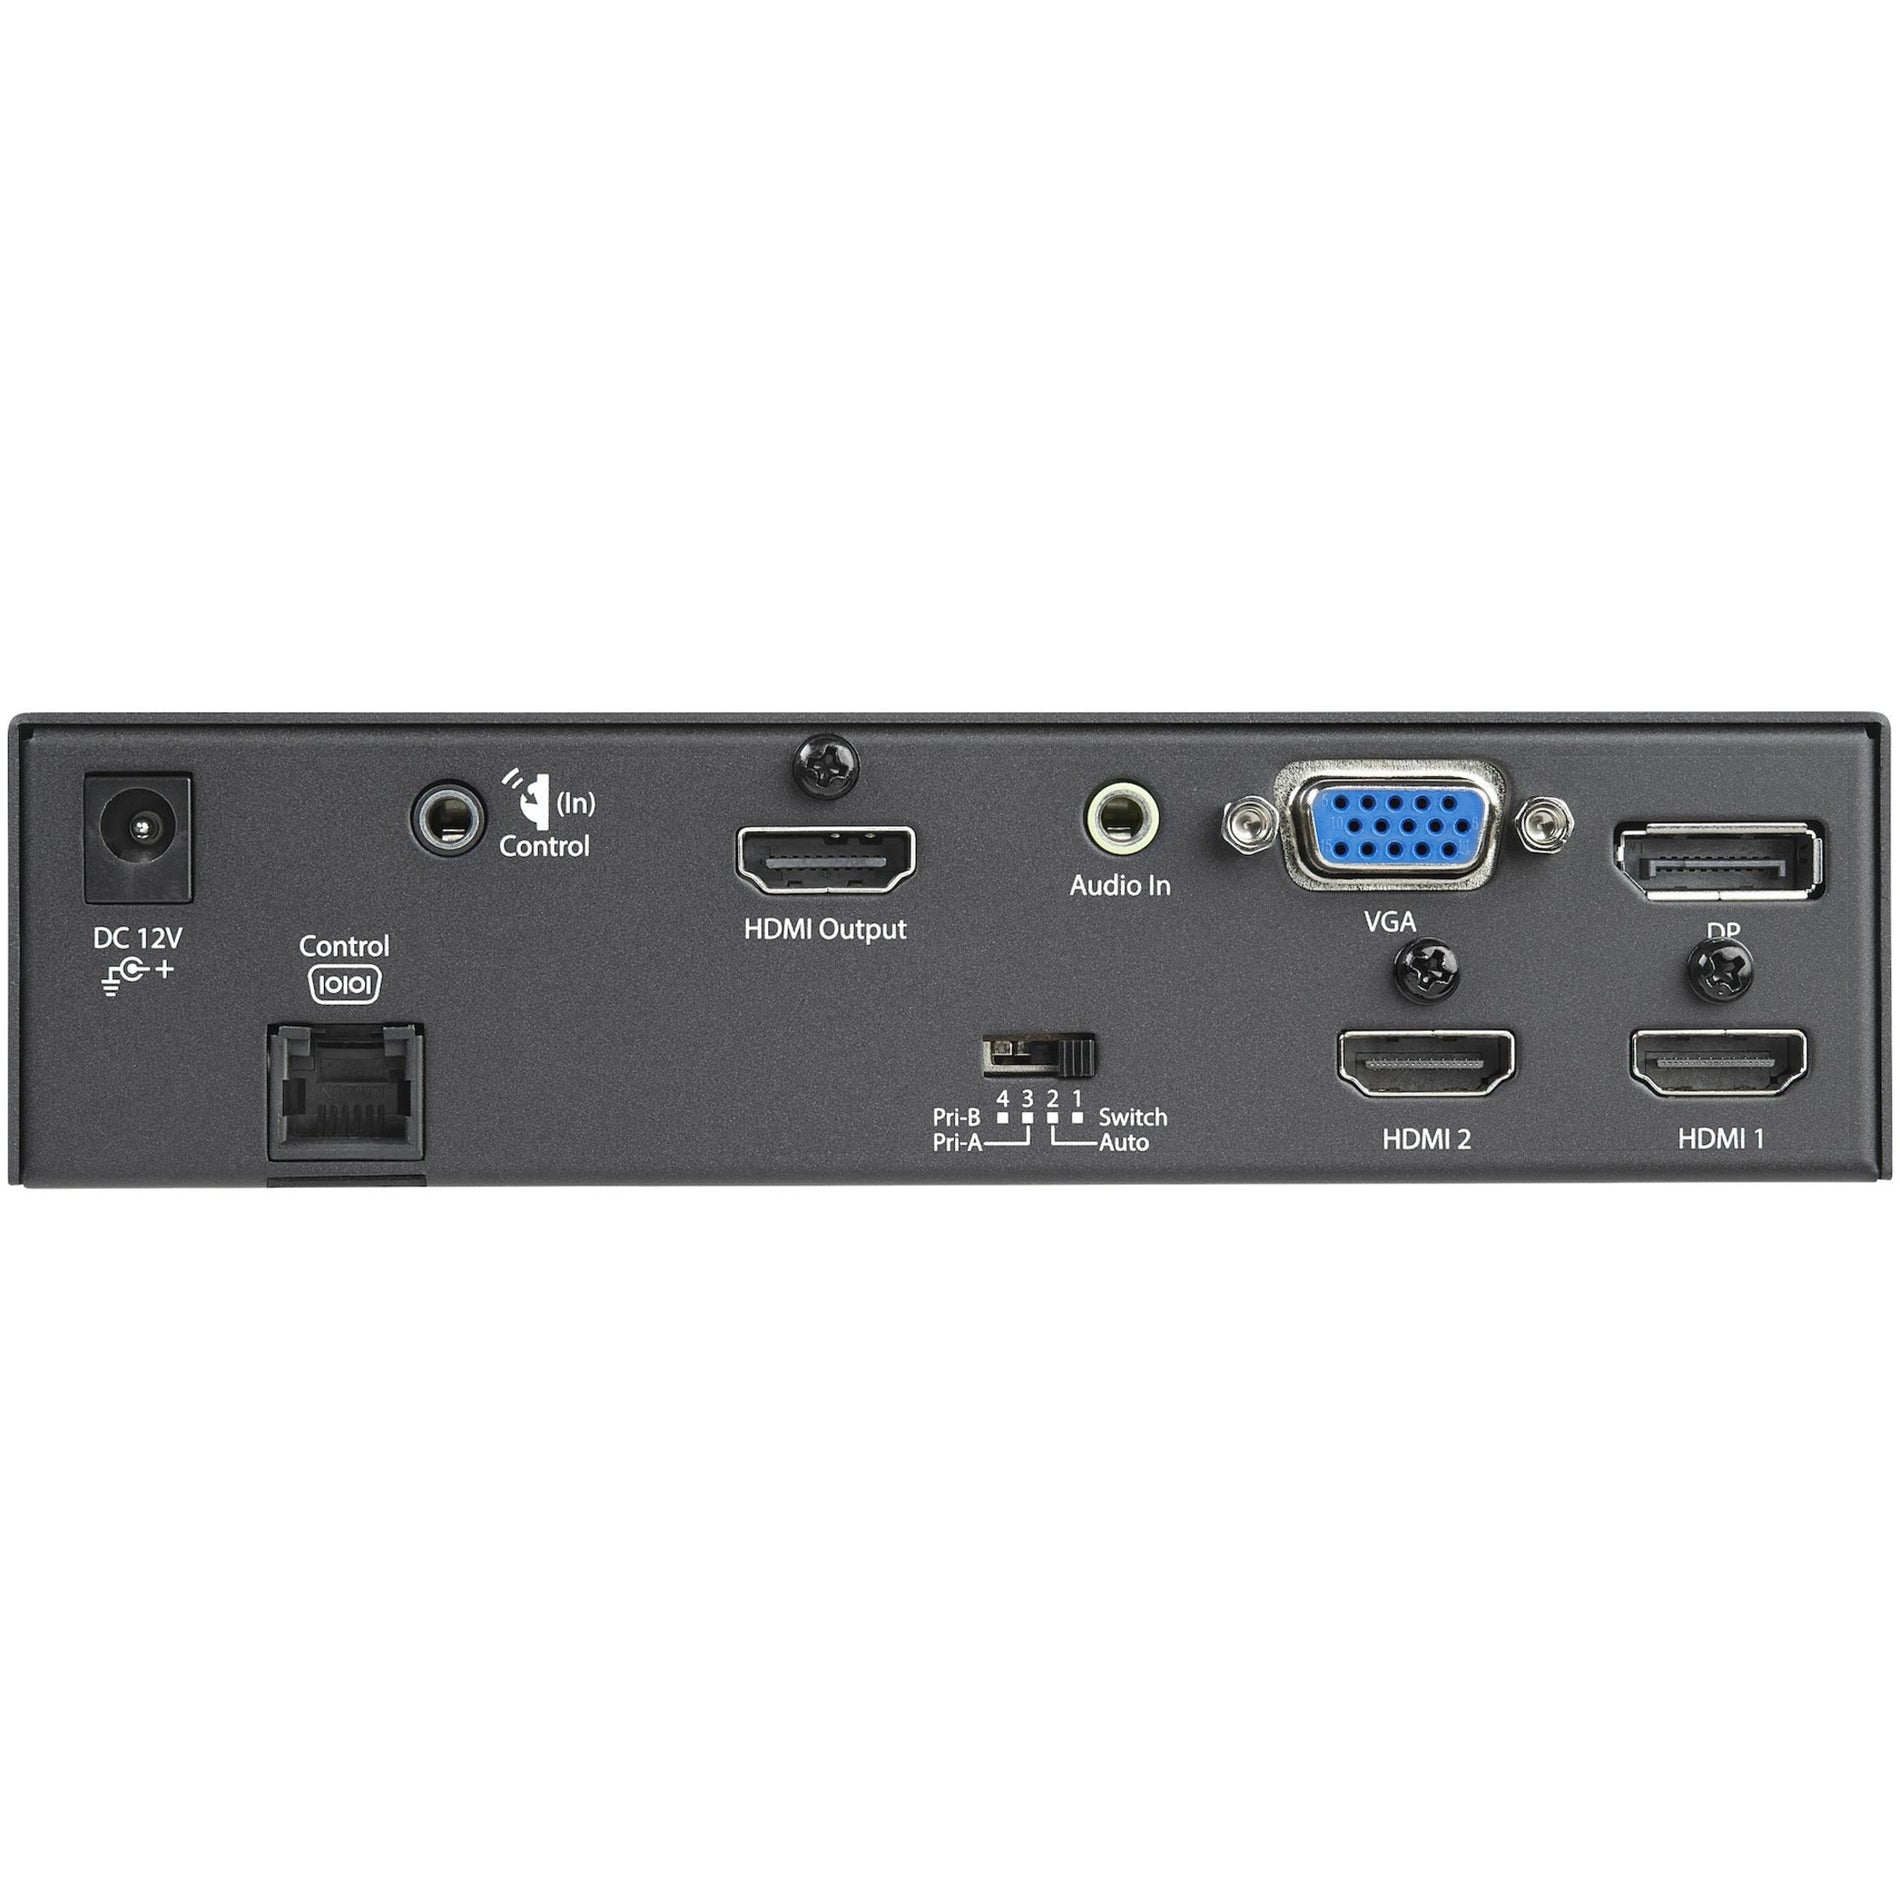 StarTech.com HDVGADP2HD Multi-Input to HDMI Converter Switch - 4K, Priority and Automatic Switch [Discontinued]